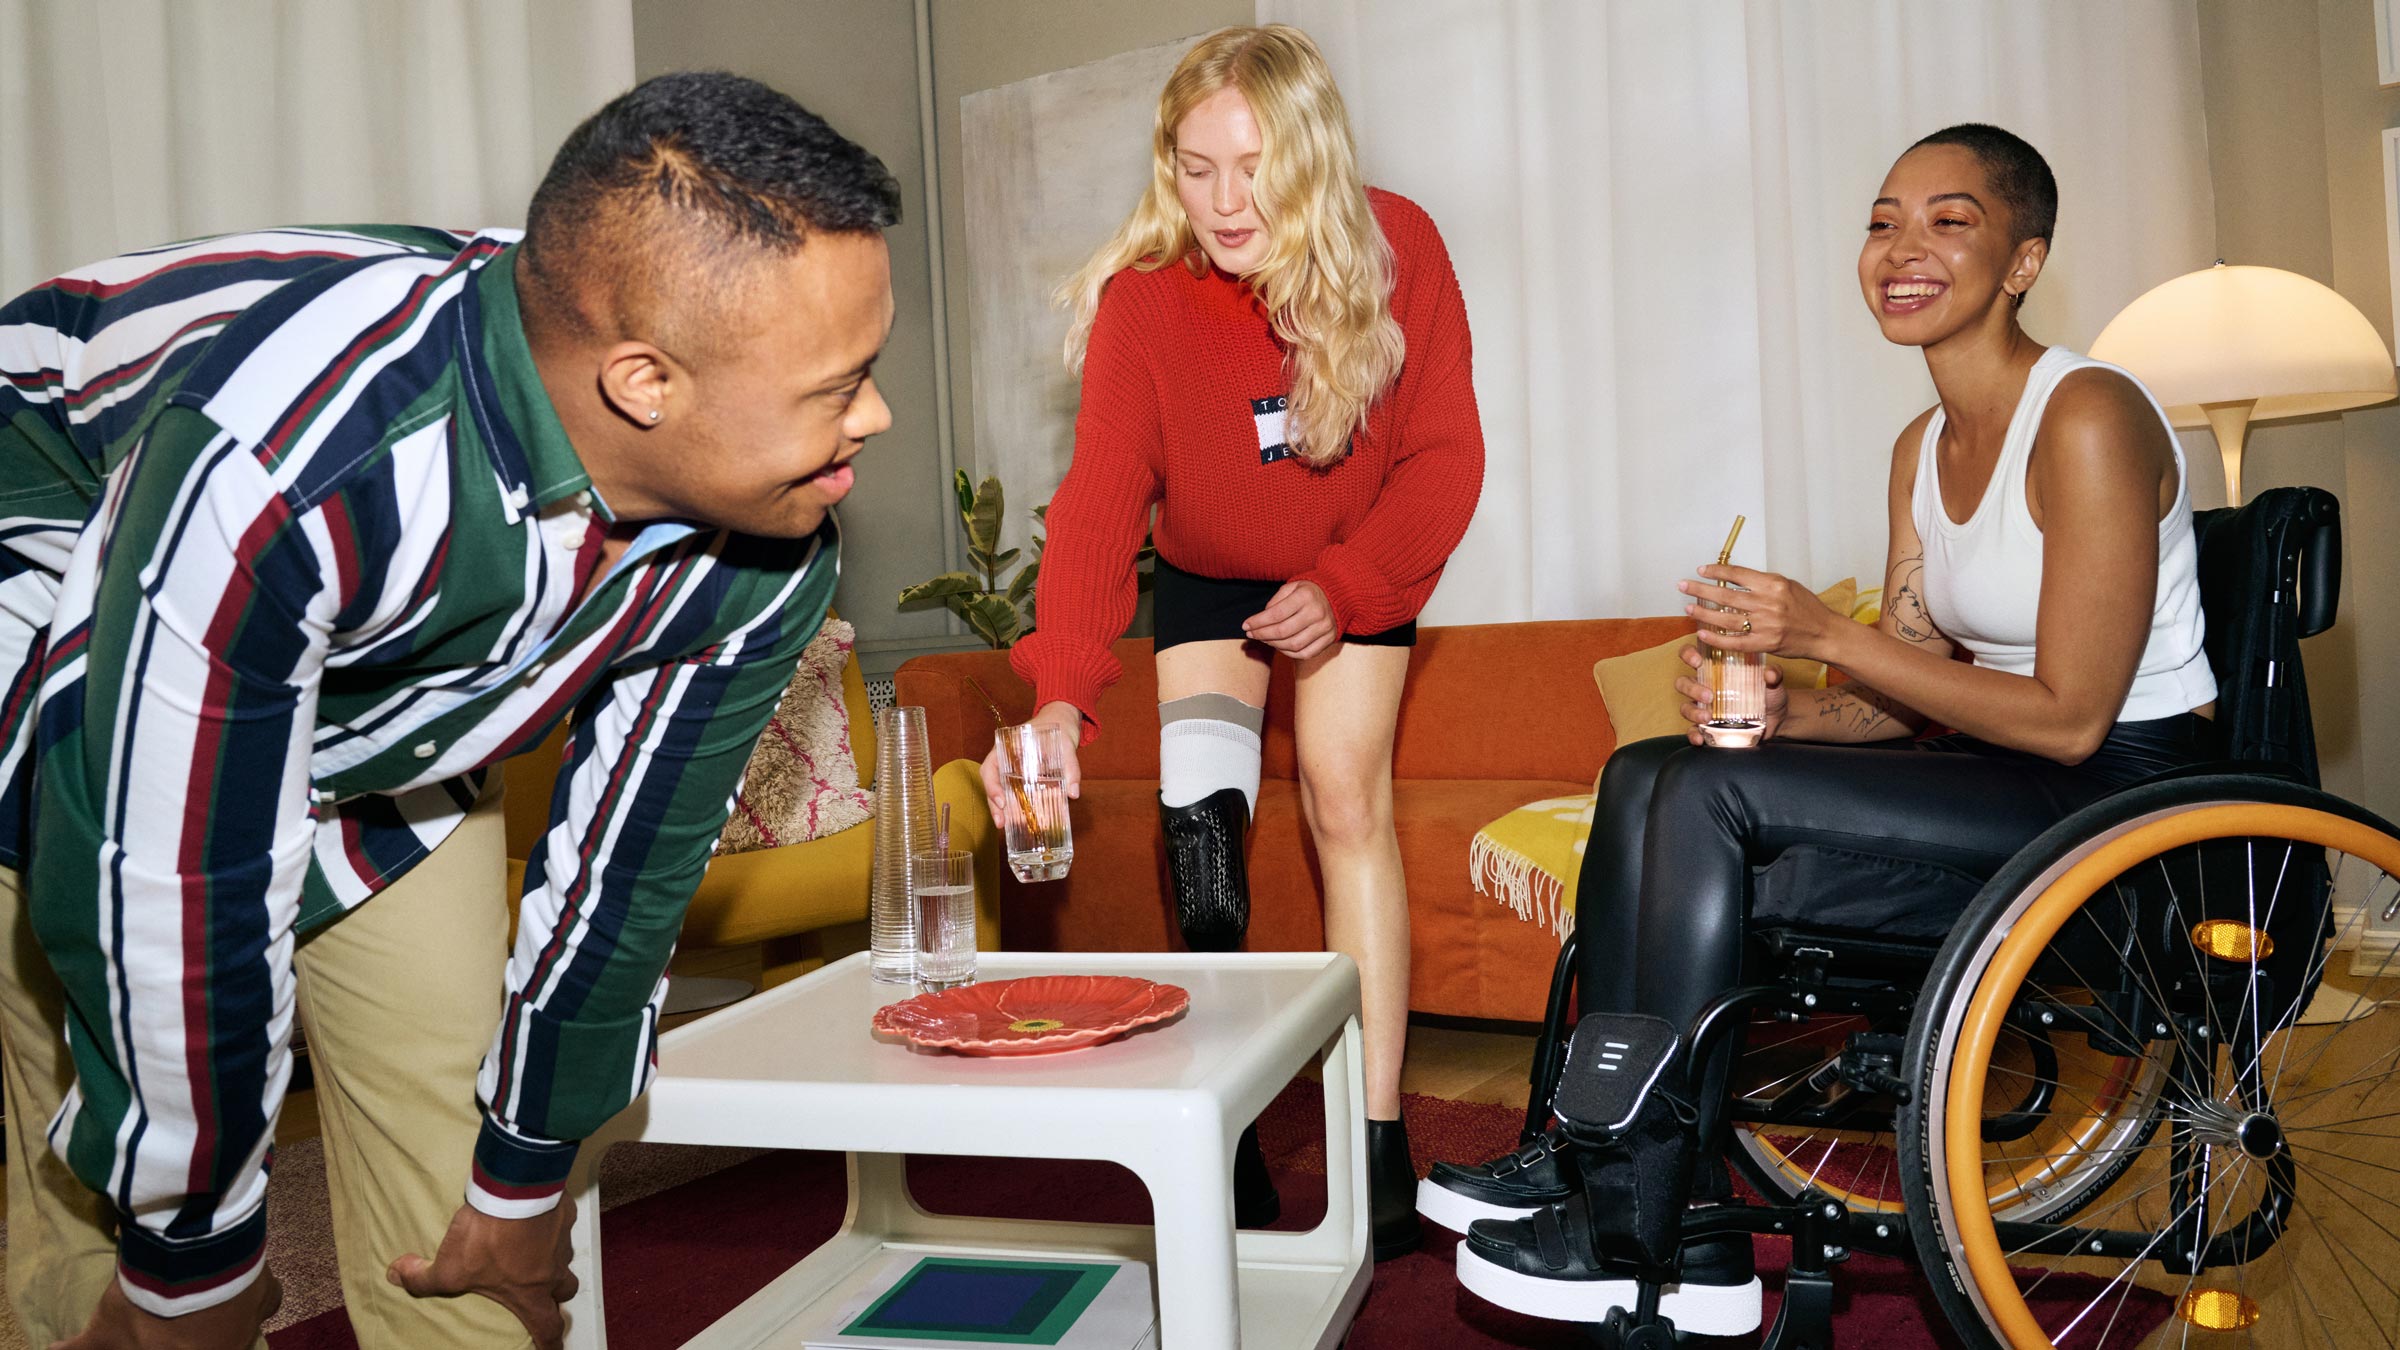 Ad campaign for Zalando's first Adaptive Fashion collections embracing the disabled community. (Courtesy of Zalando)